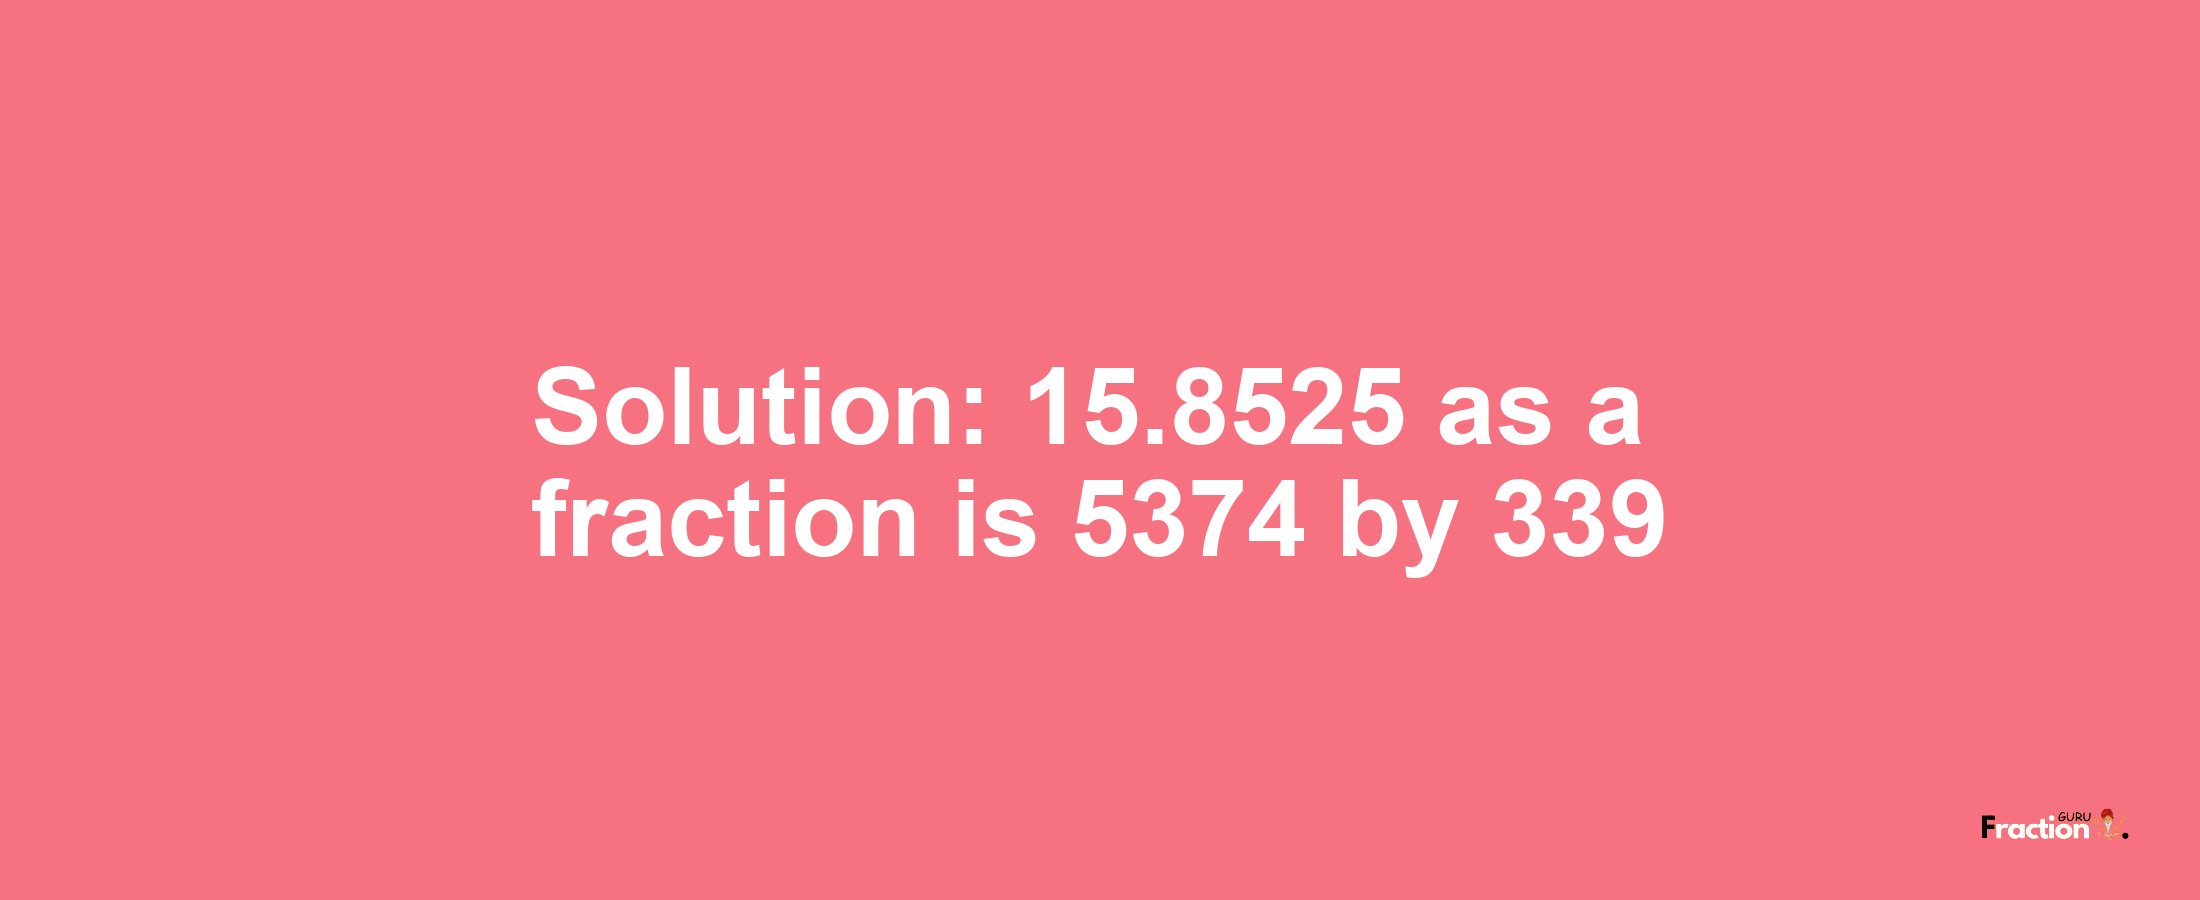 Solution:15.8525 as a fraction is 5374/339